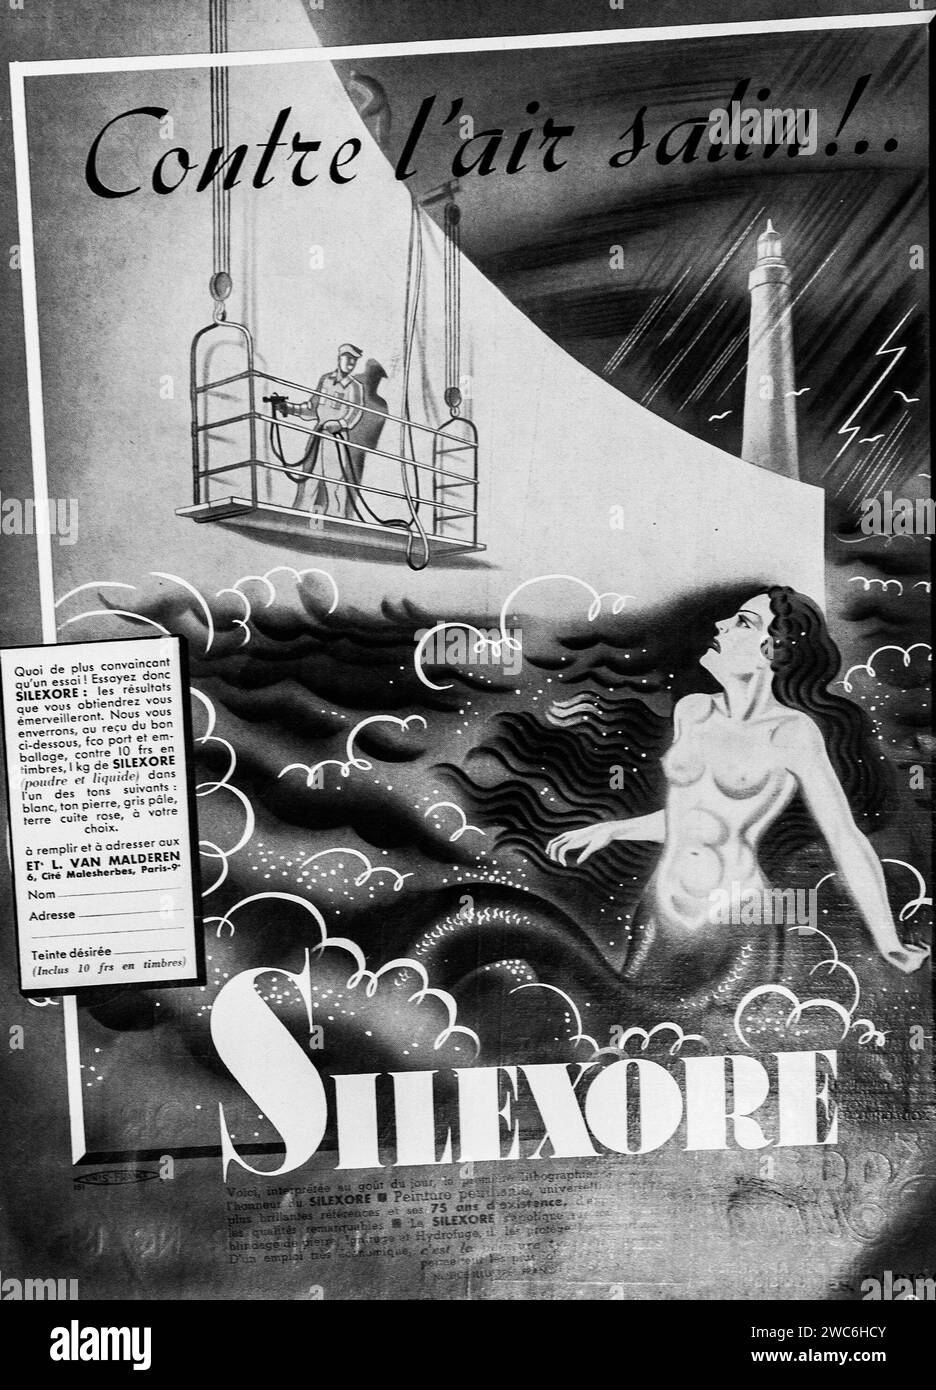 This 1930s  black and white poster advertises Silexore Paint with artwork that combines industrial and mythical sea elements, hinting at the products protective qualities. Stock Photo